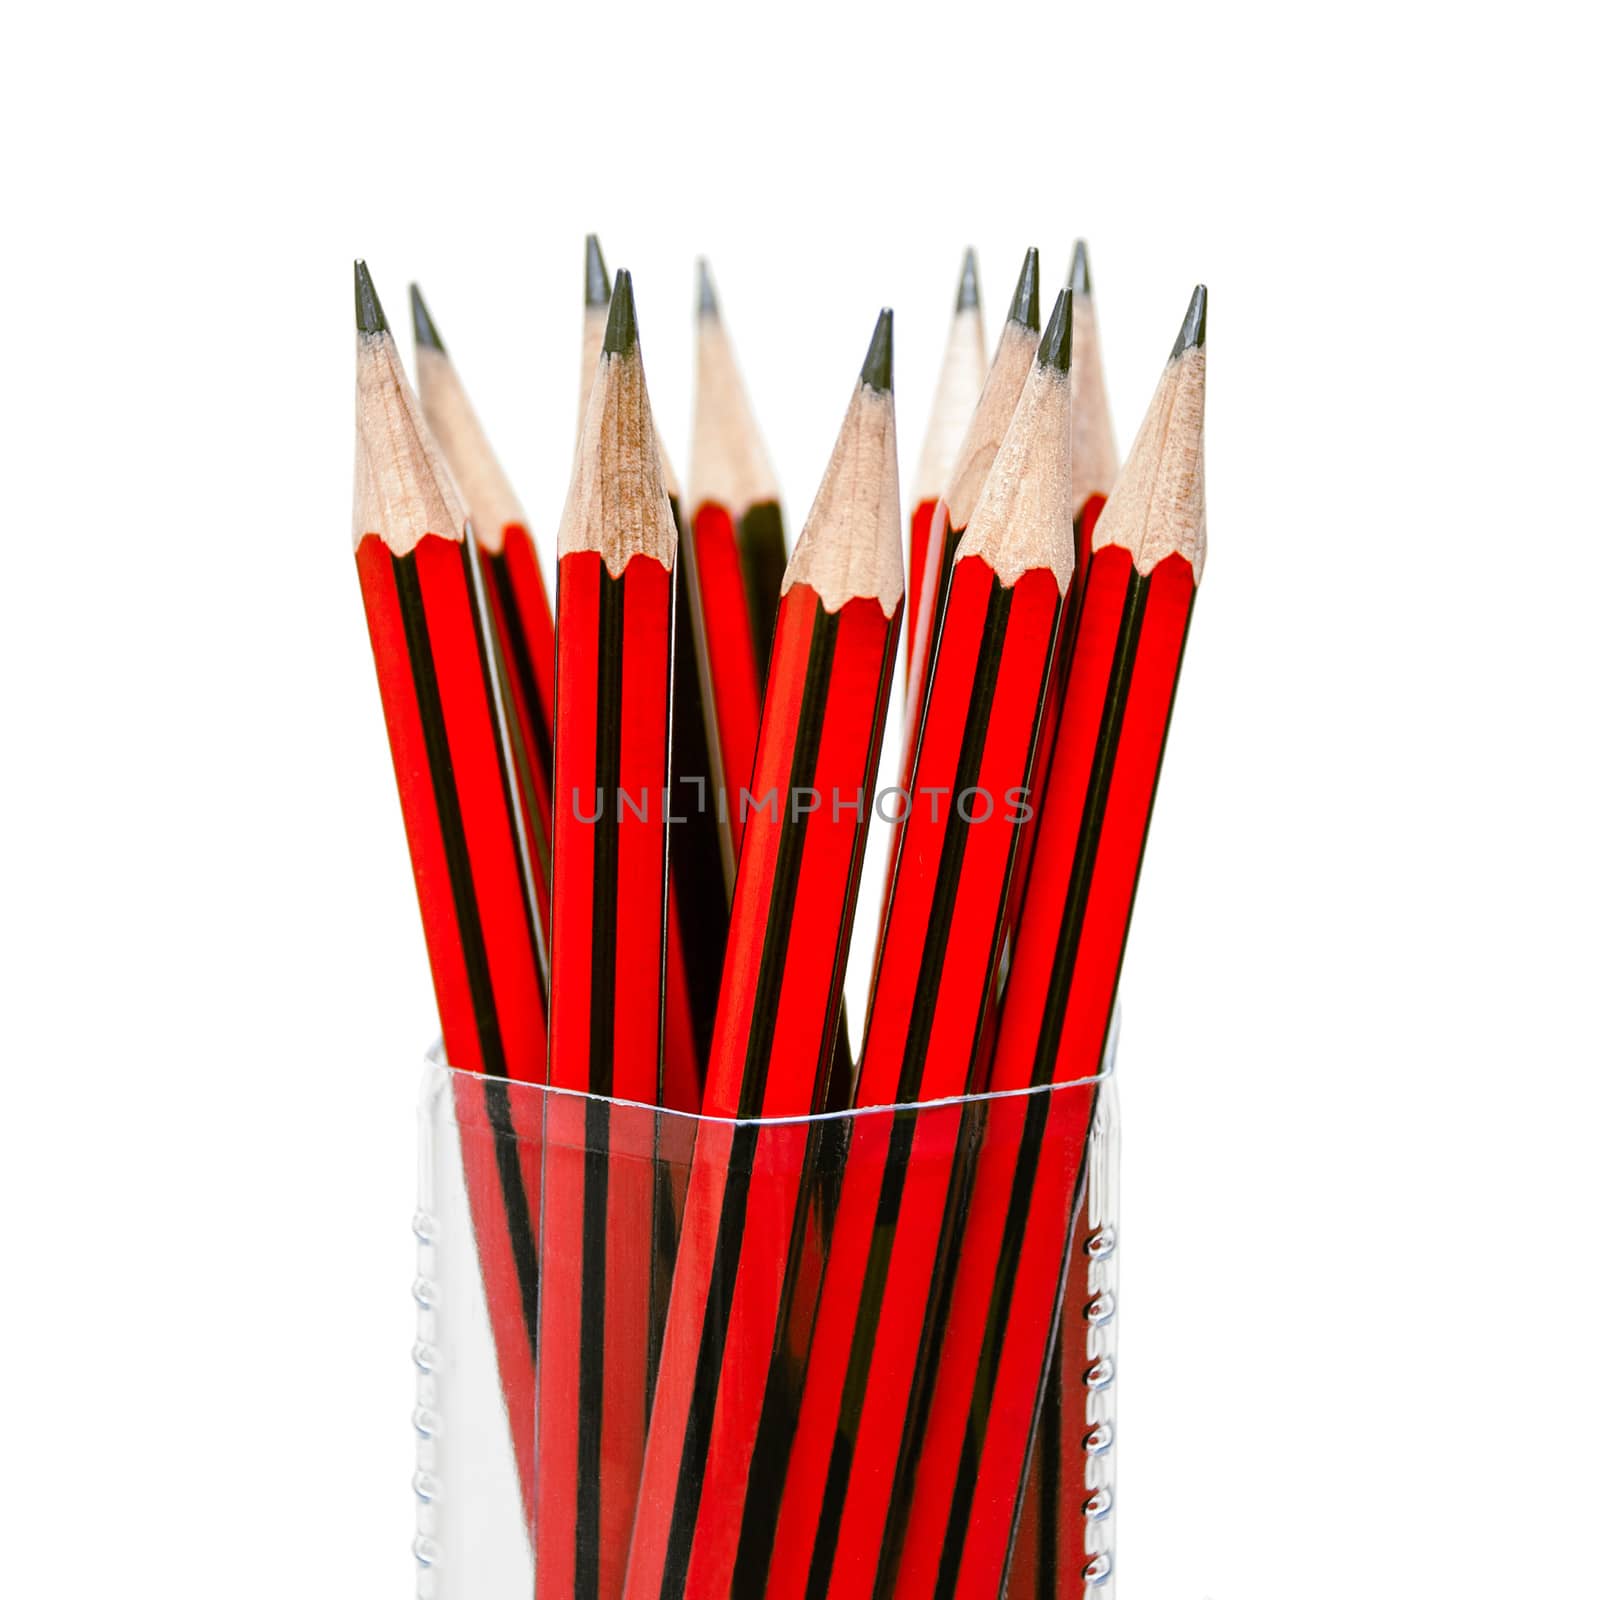 Black and white pencils in red on a white isolated background.